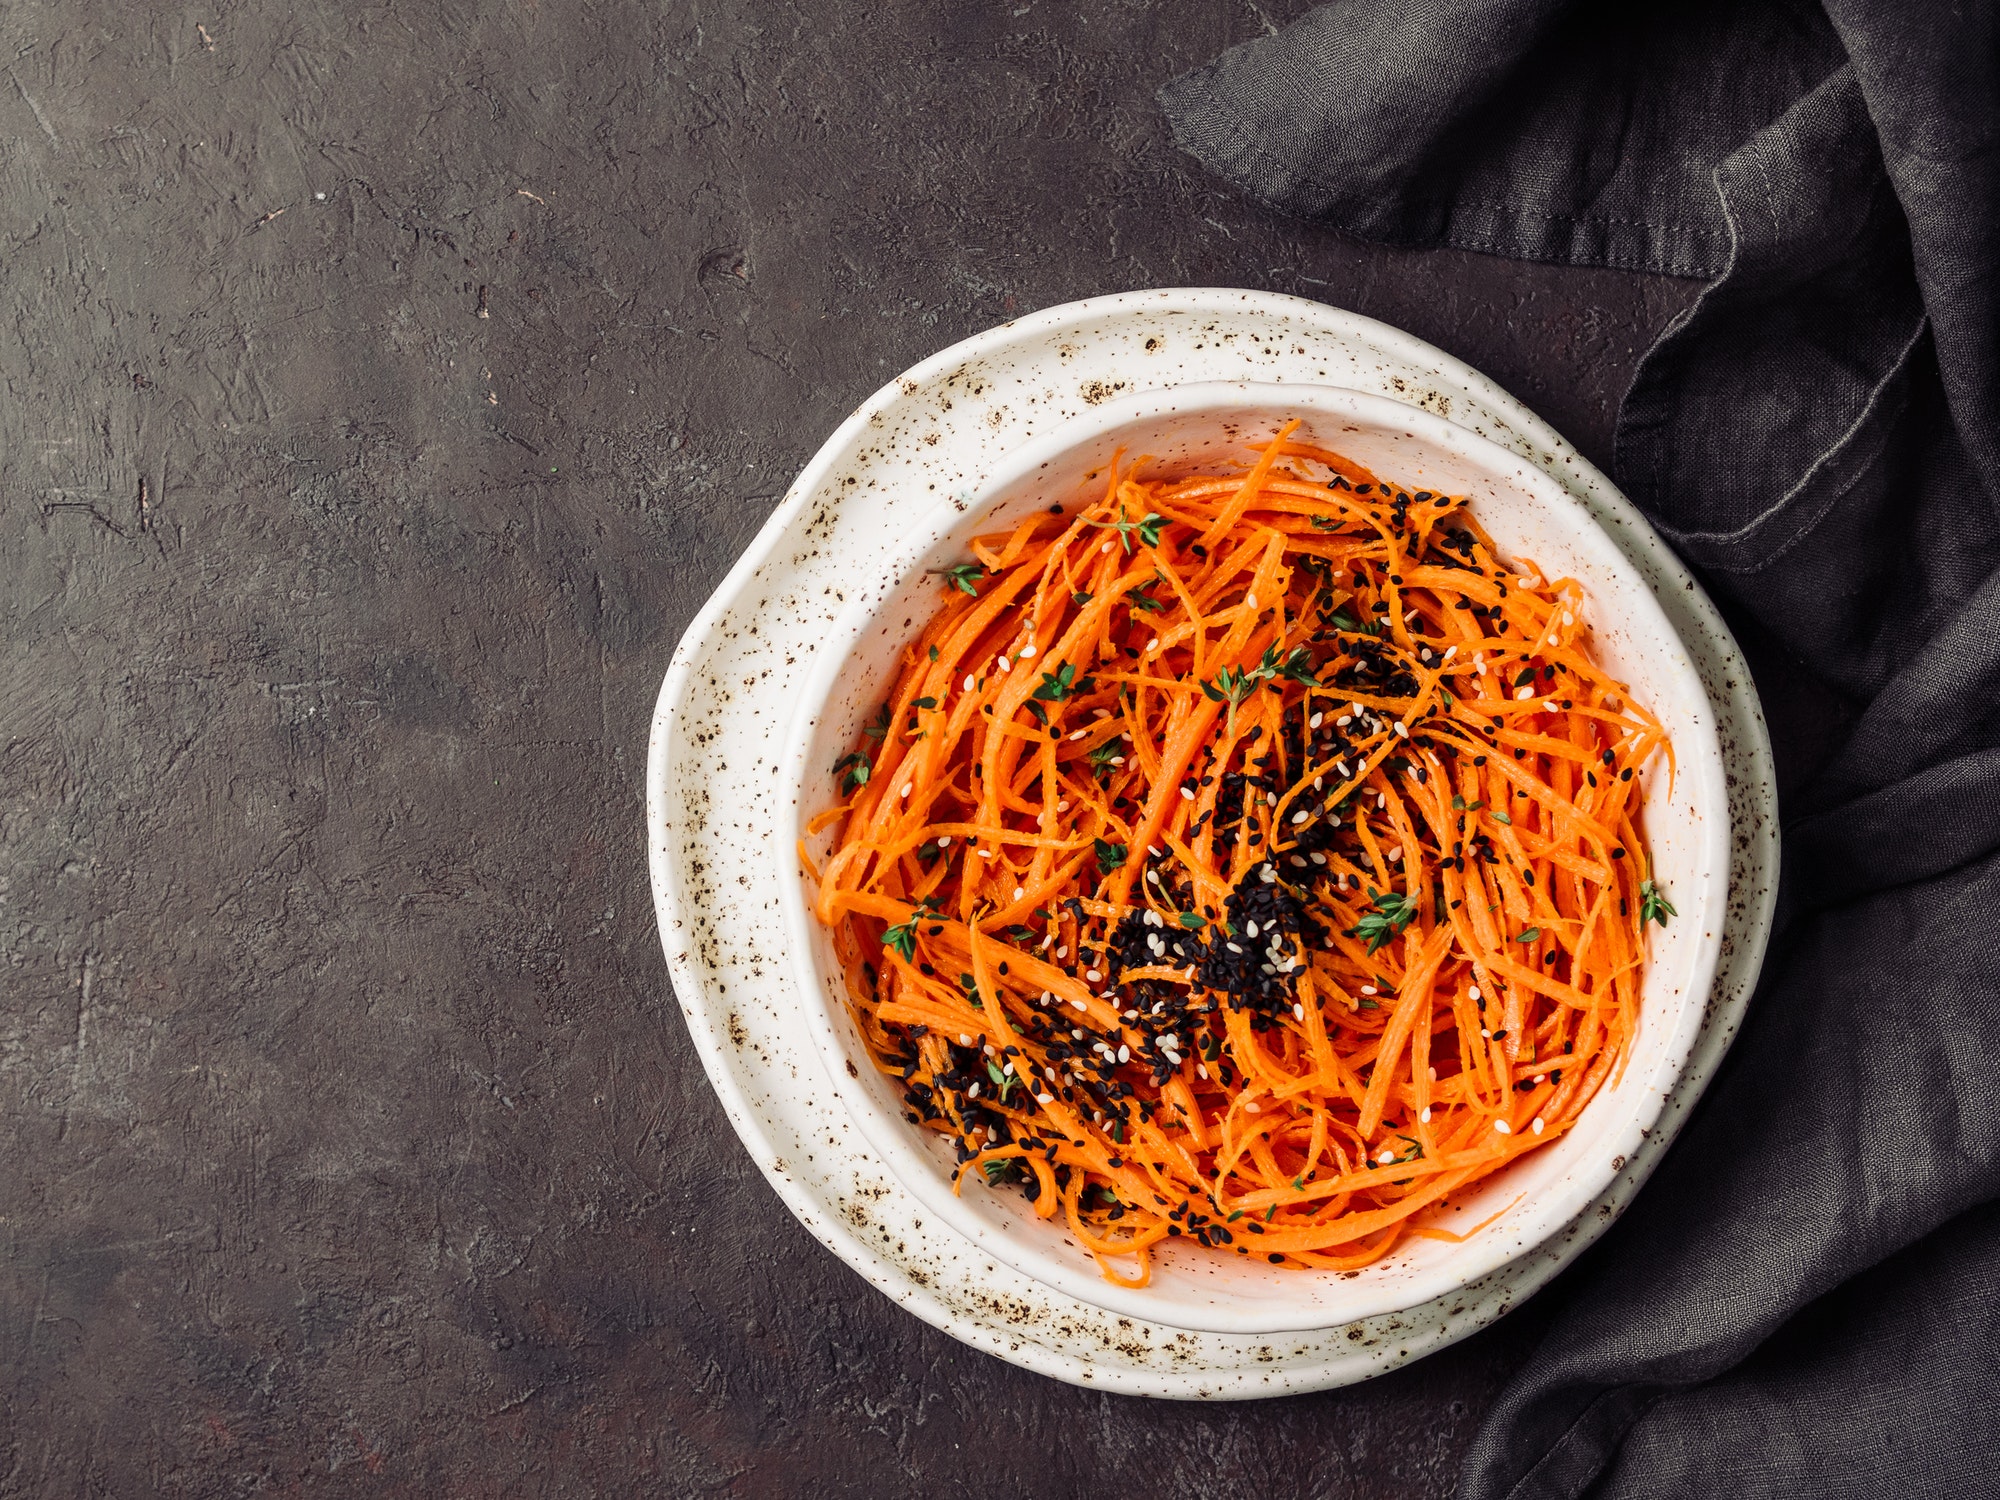 Raw carrot noodles or spaghetti, top view